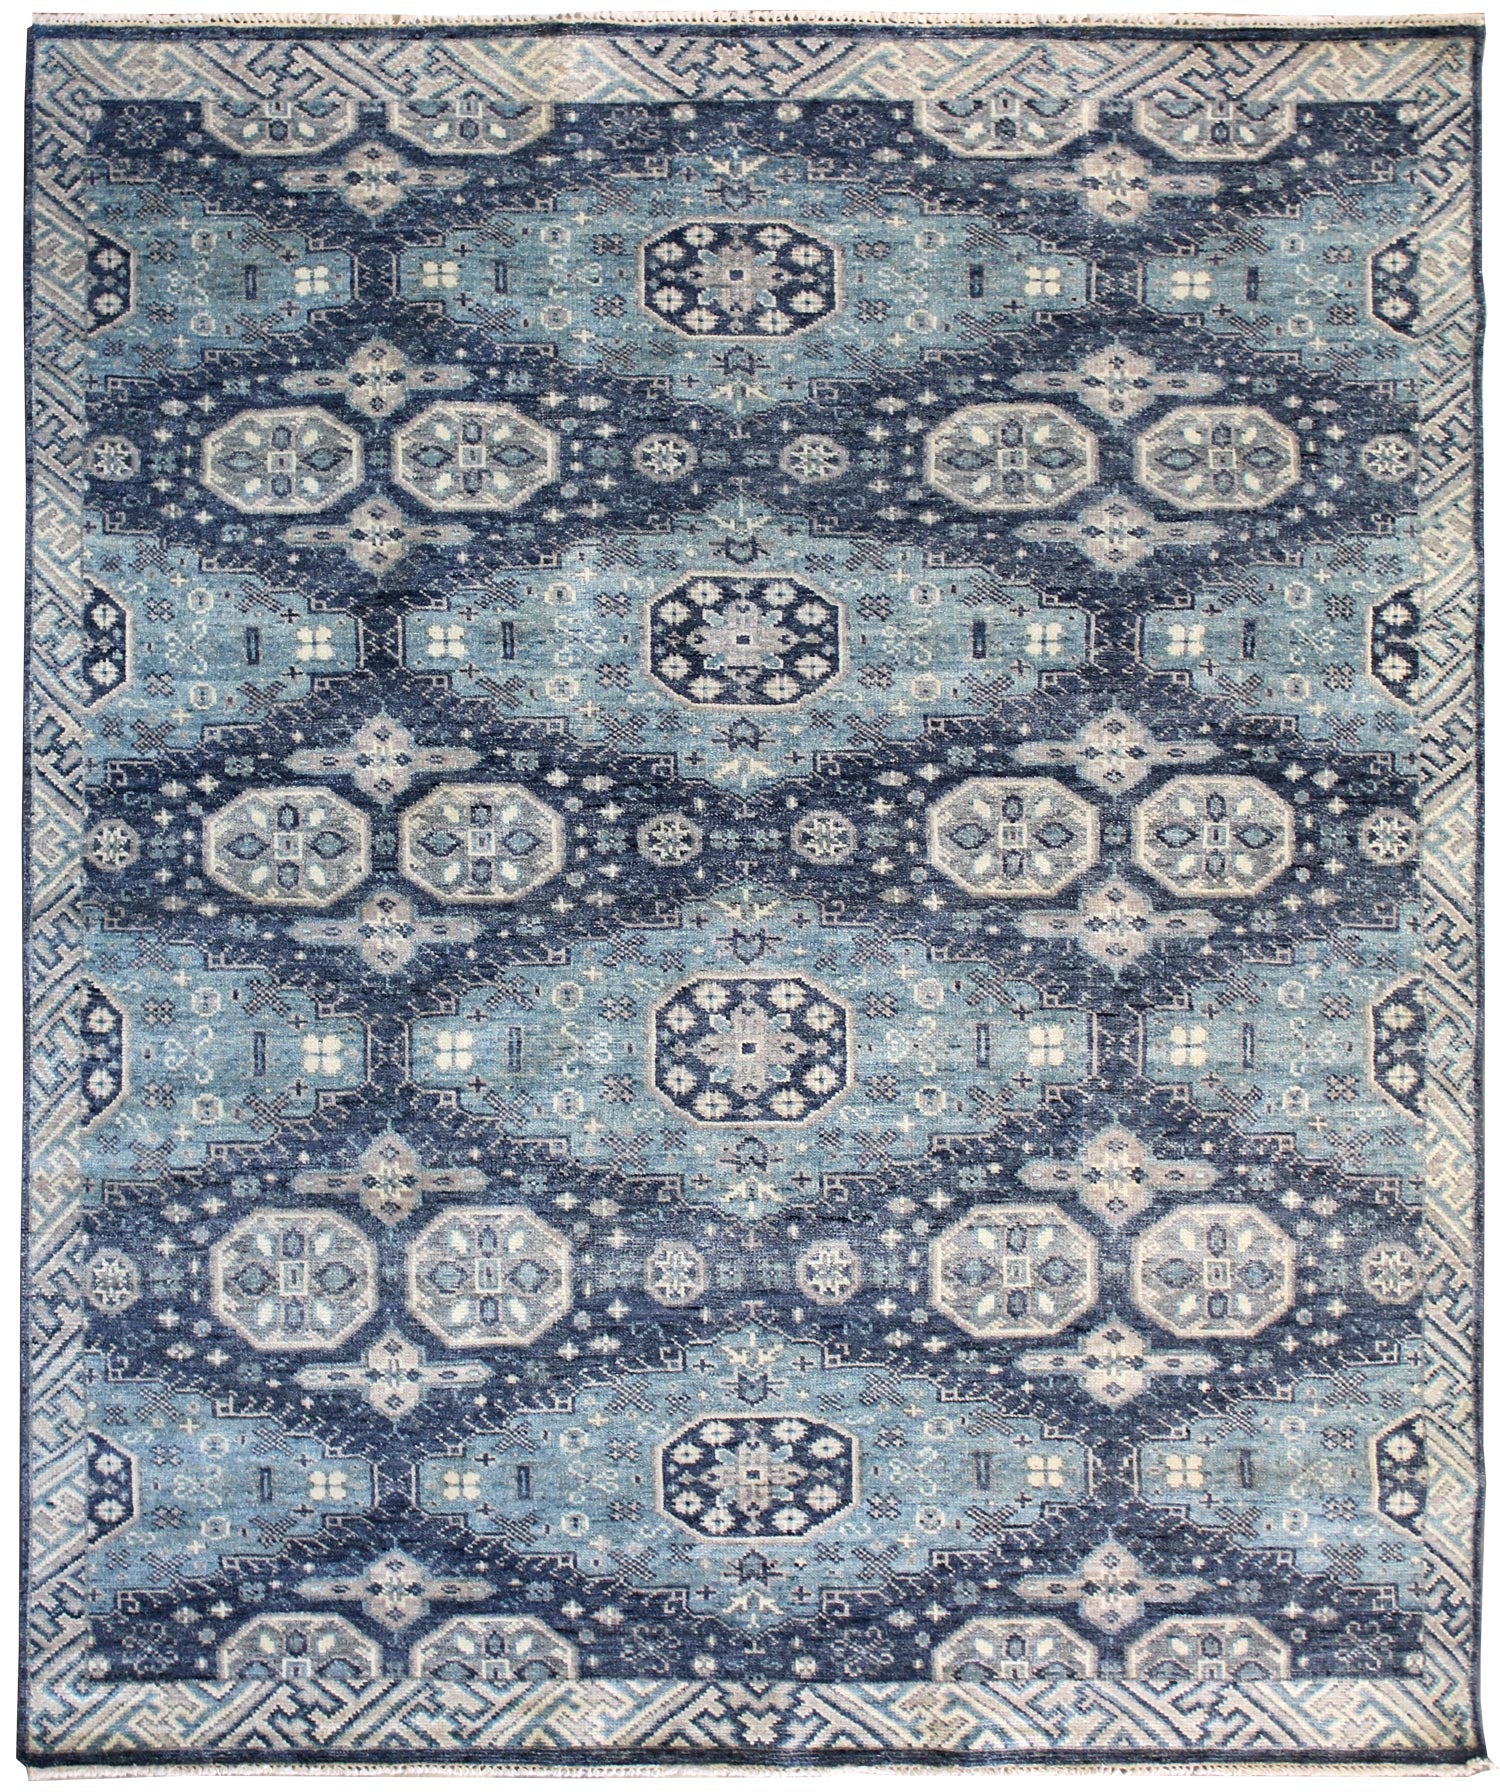 Vecce Handwoven Transitional Rug